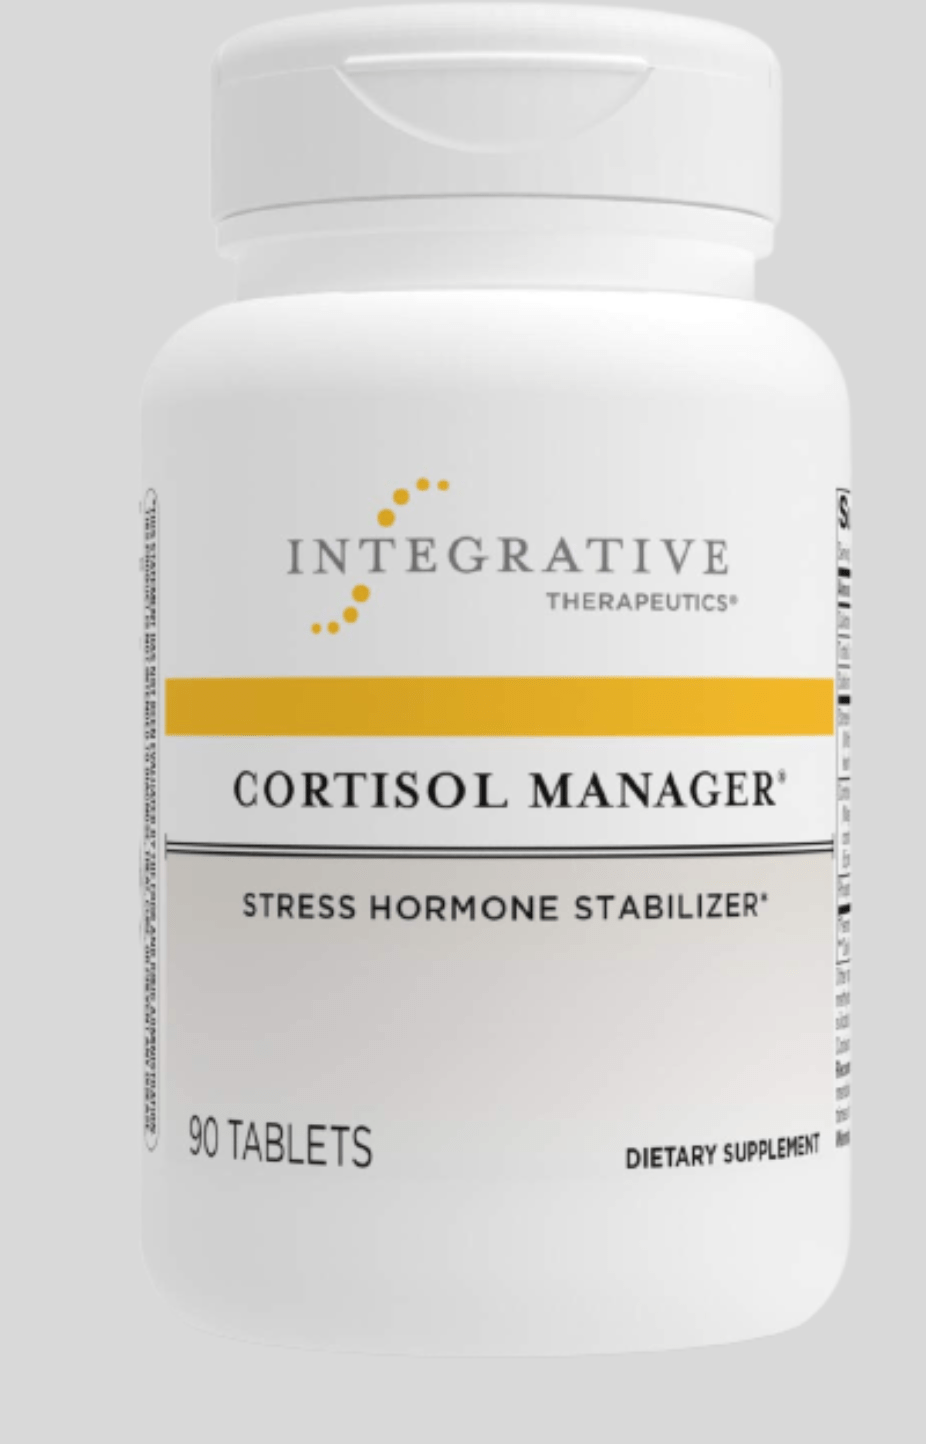 What Are the Side Effects of Cortisol Manager?